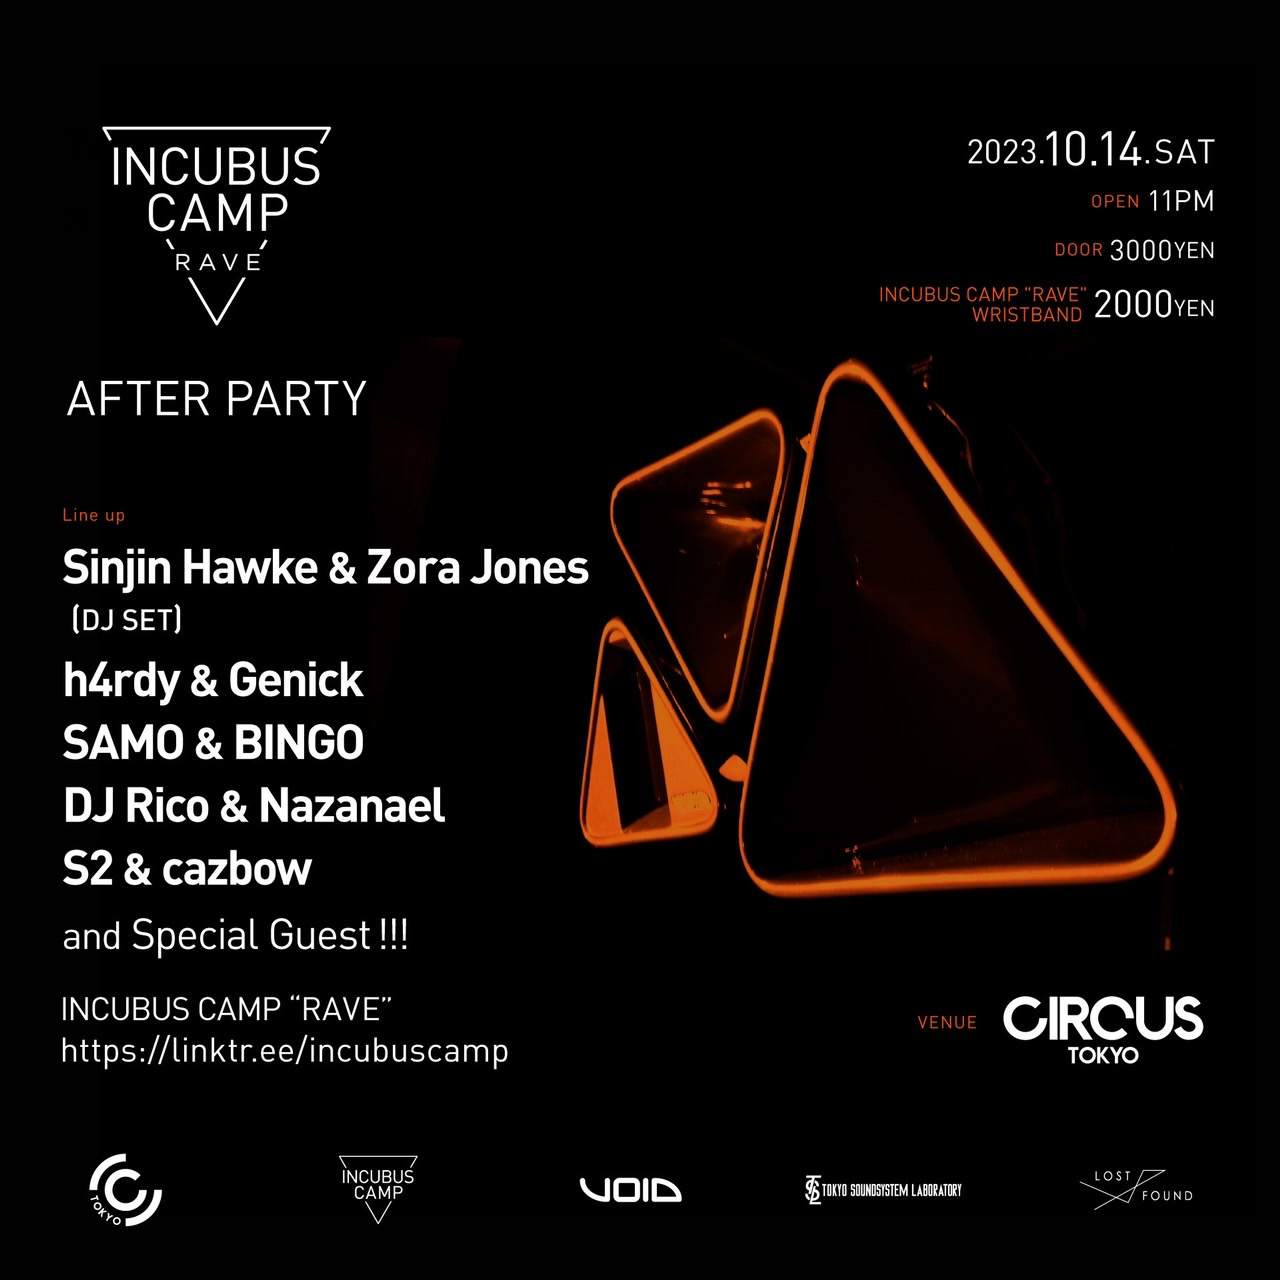 INCUBUS CAMP REVE AFTER PARTY - フライヤー表